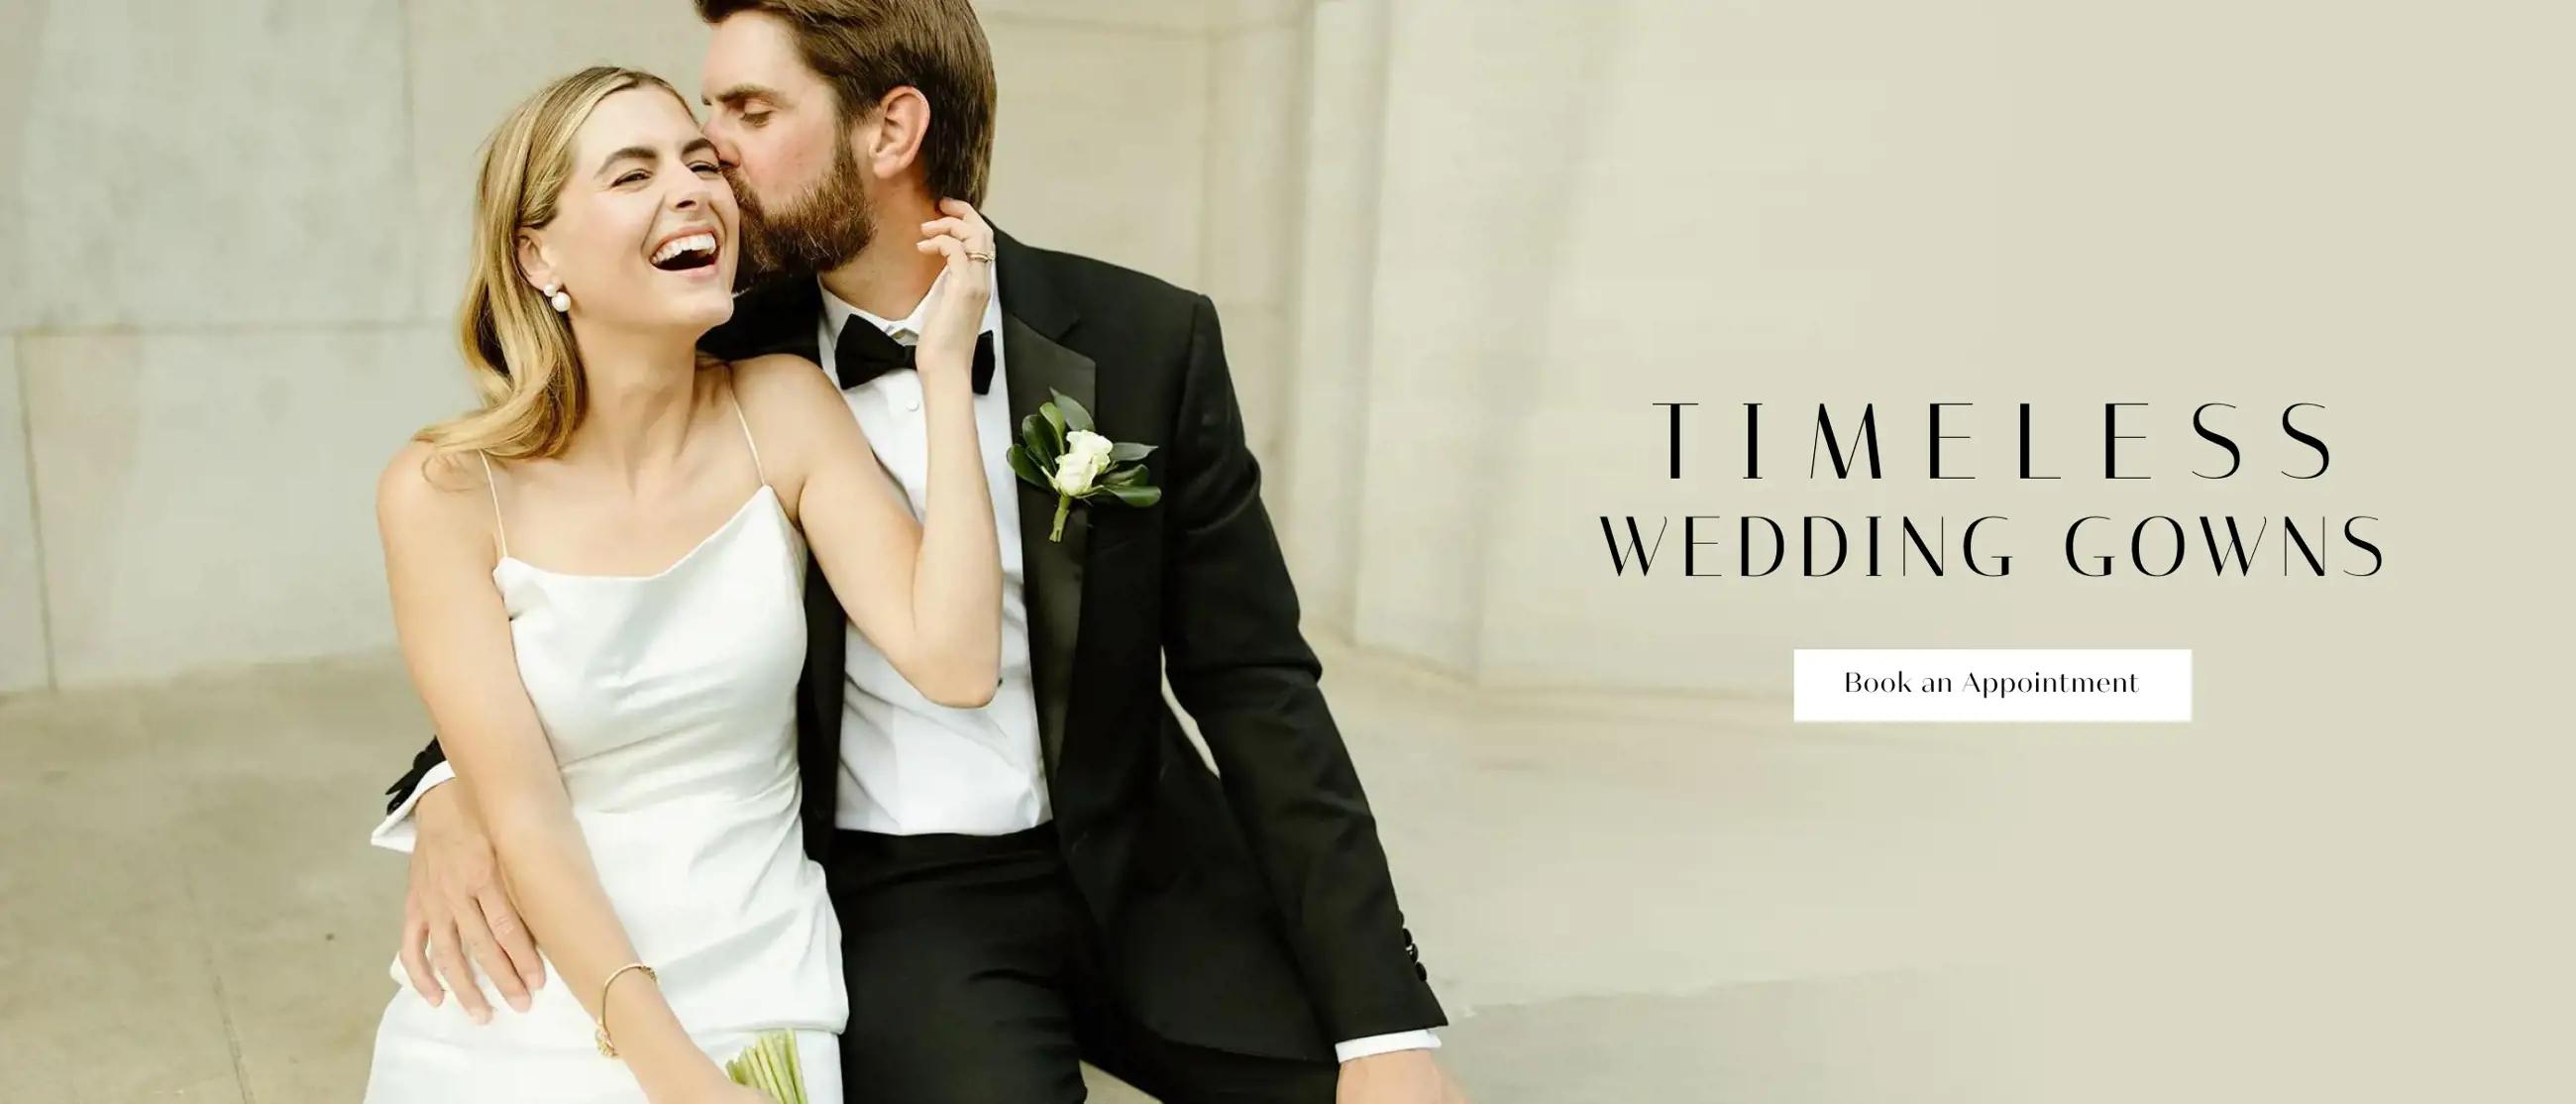 Timeless wedding gowns at LVD Bridal